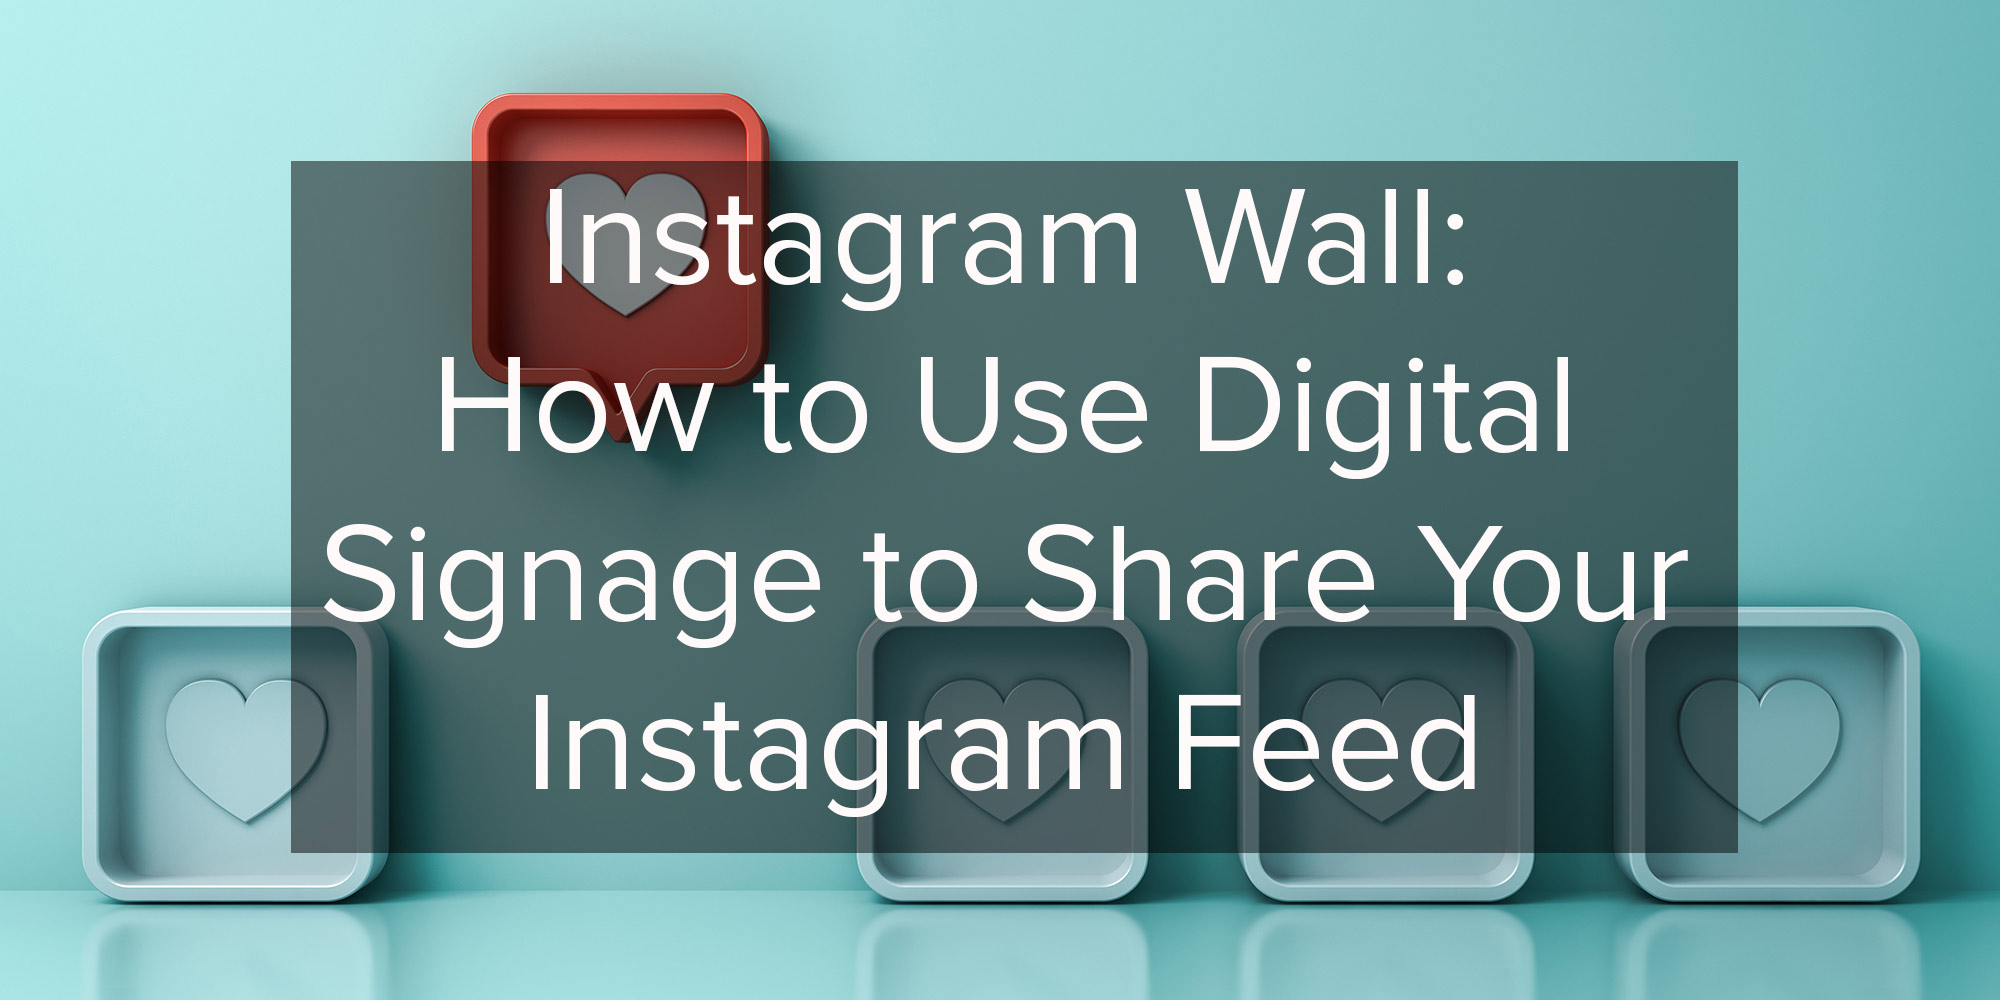 How to Use Digital Signage to Share Your Instagram Feed